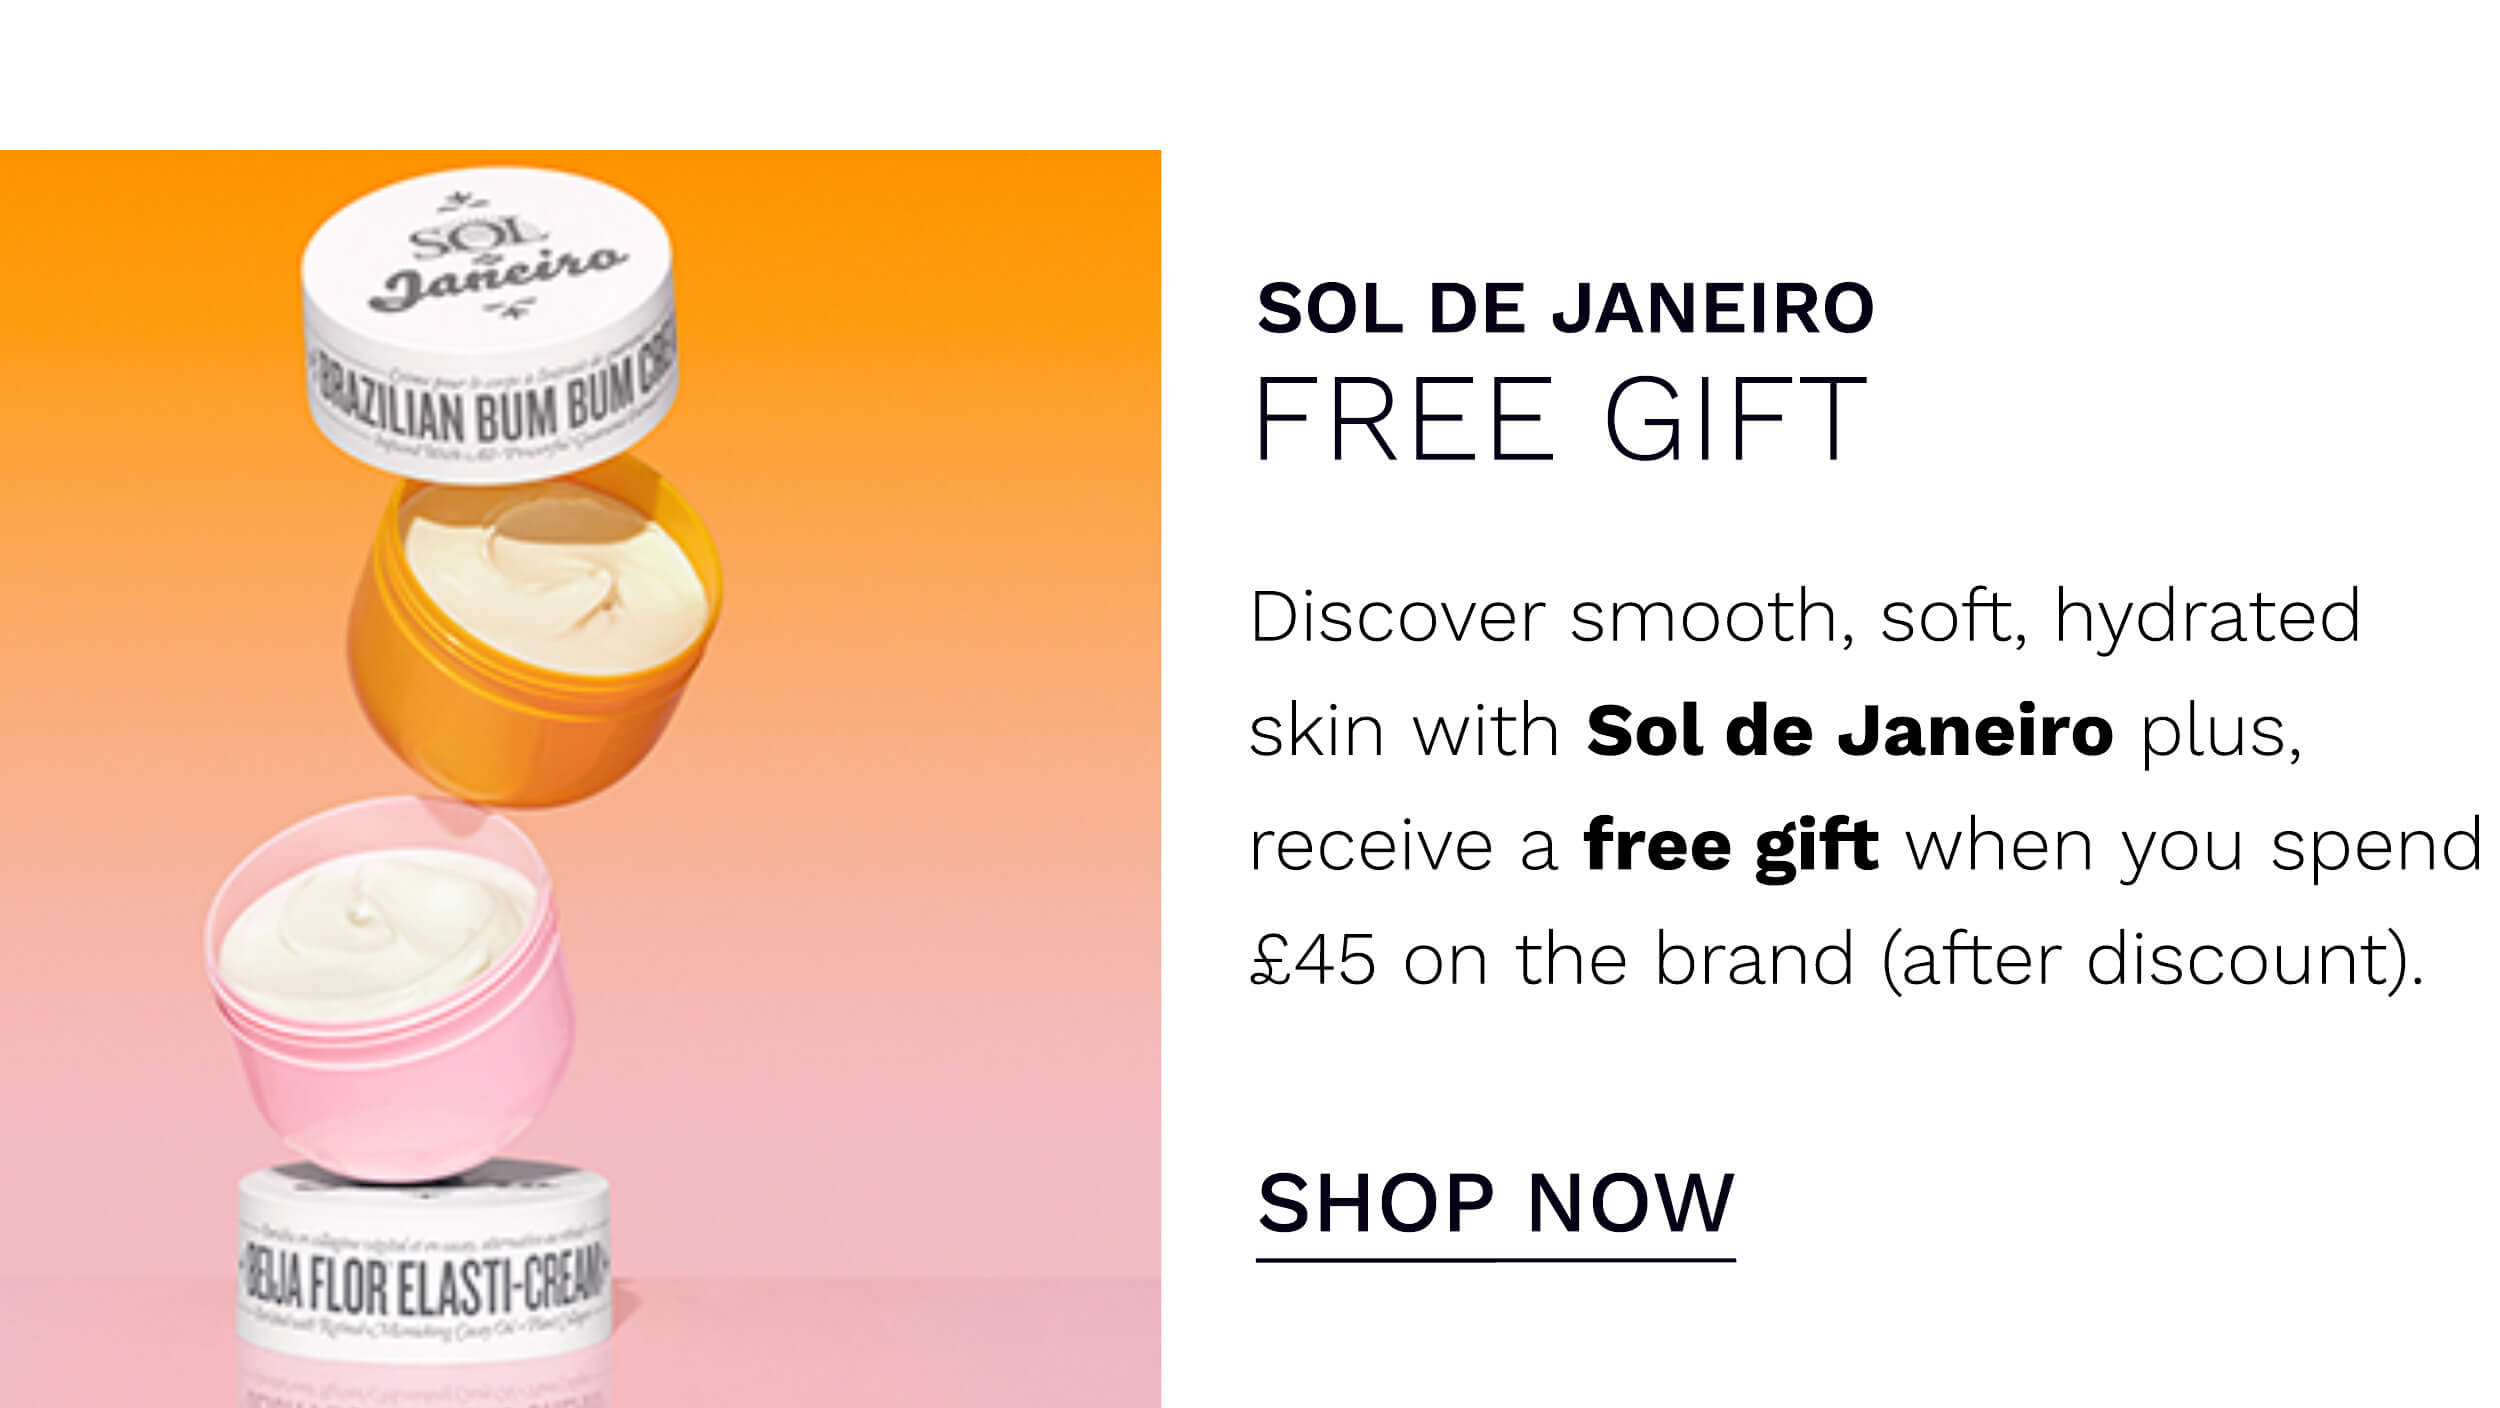 SOL DE JANEIRO FREE GIFT Discover smooth, soft, hydrated skin with Sol de Janeiro plus, receive a free gift when you spend 45 on the brand after discount. e SHOP NOW SN FLOR ELASTHCREN - 